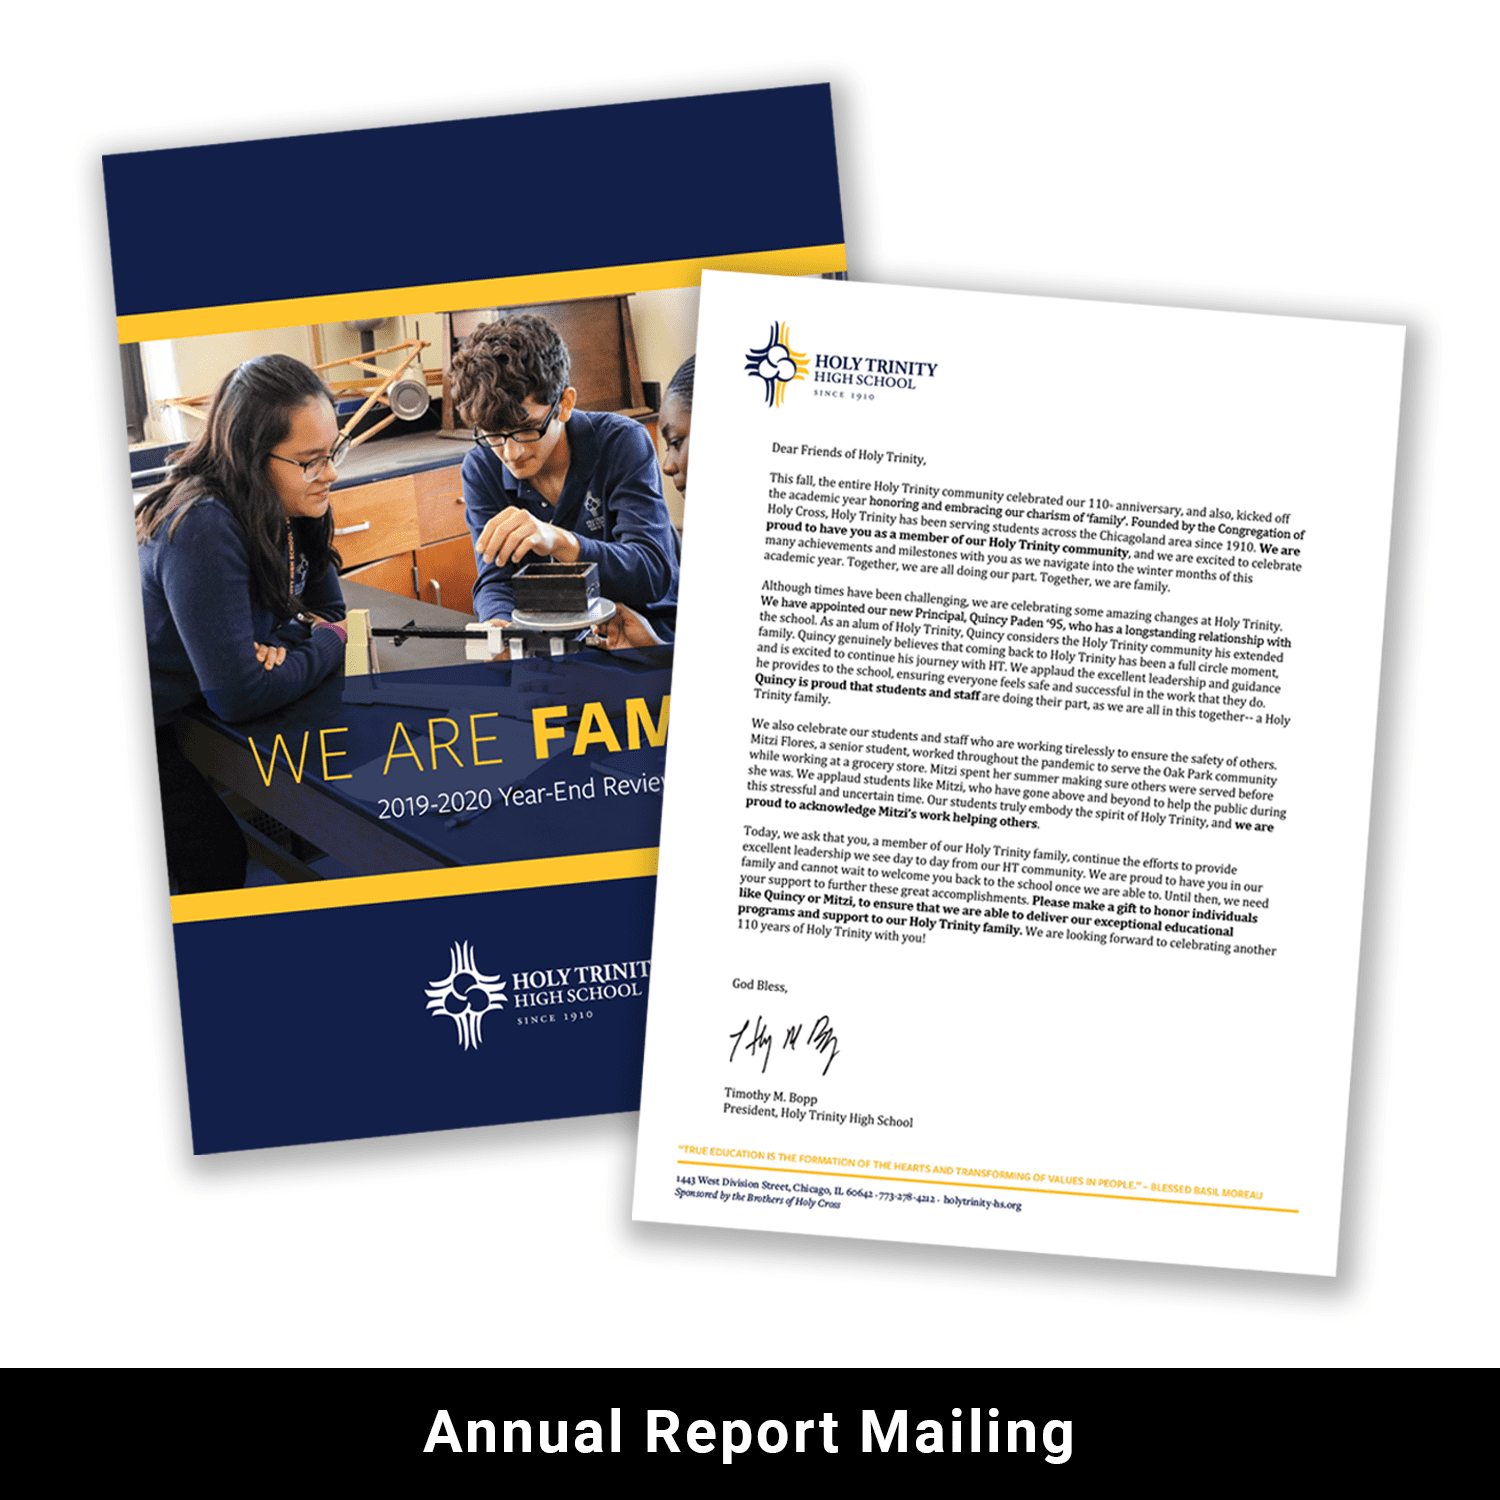 Annual report mailing example